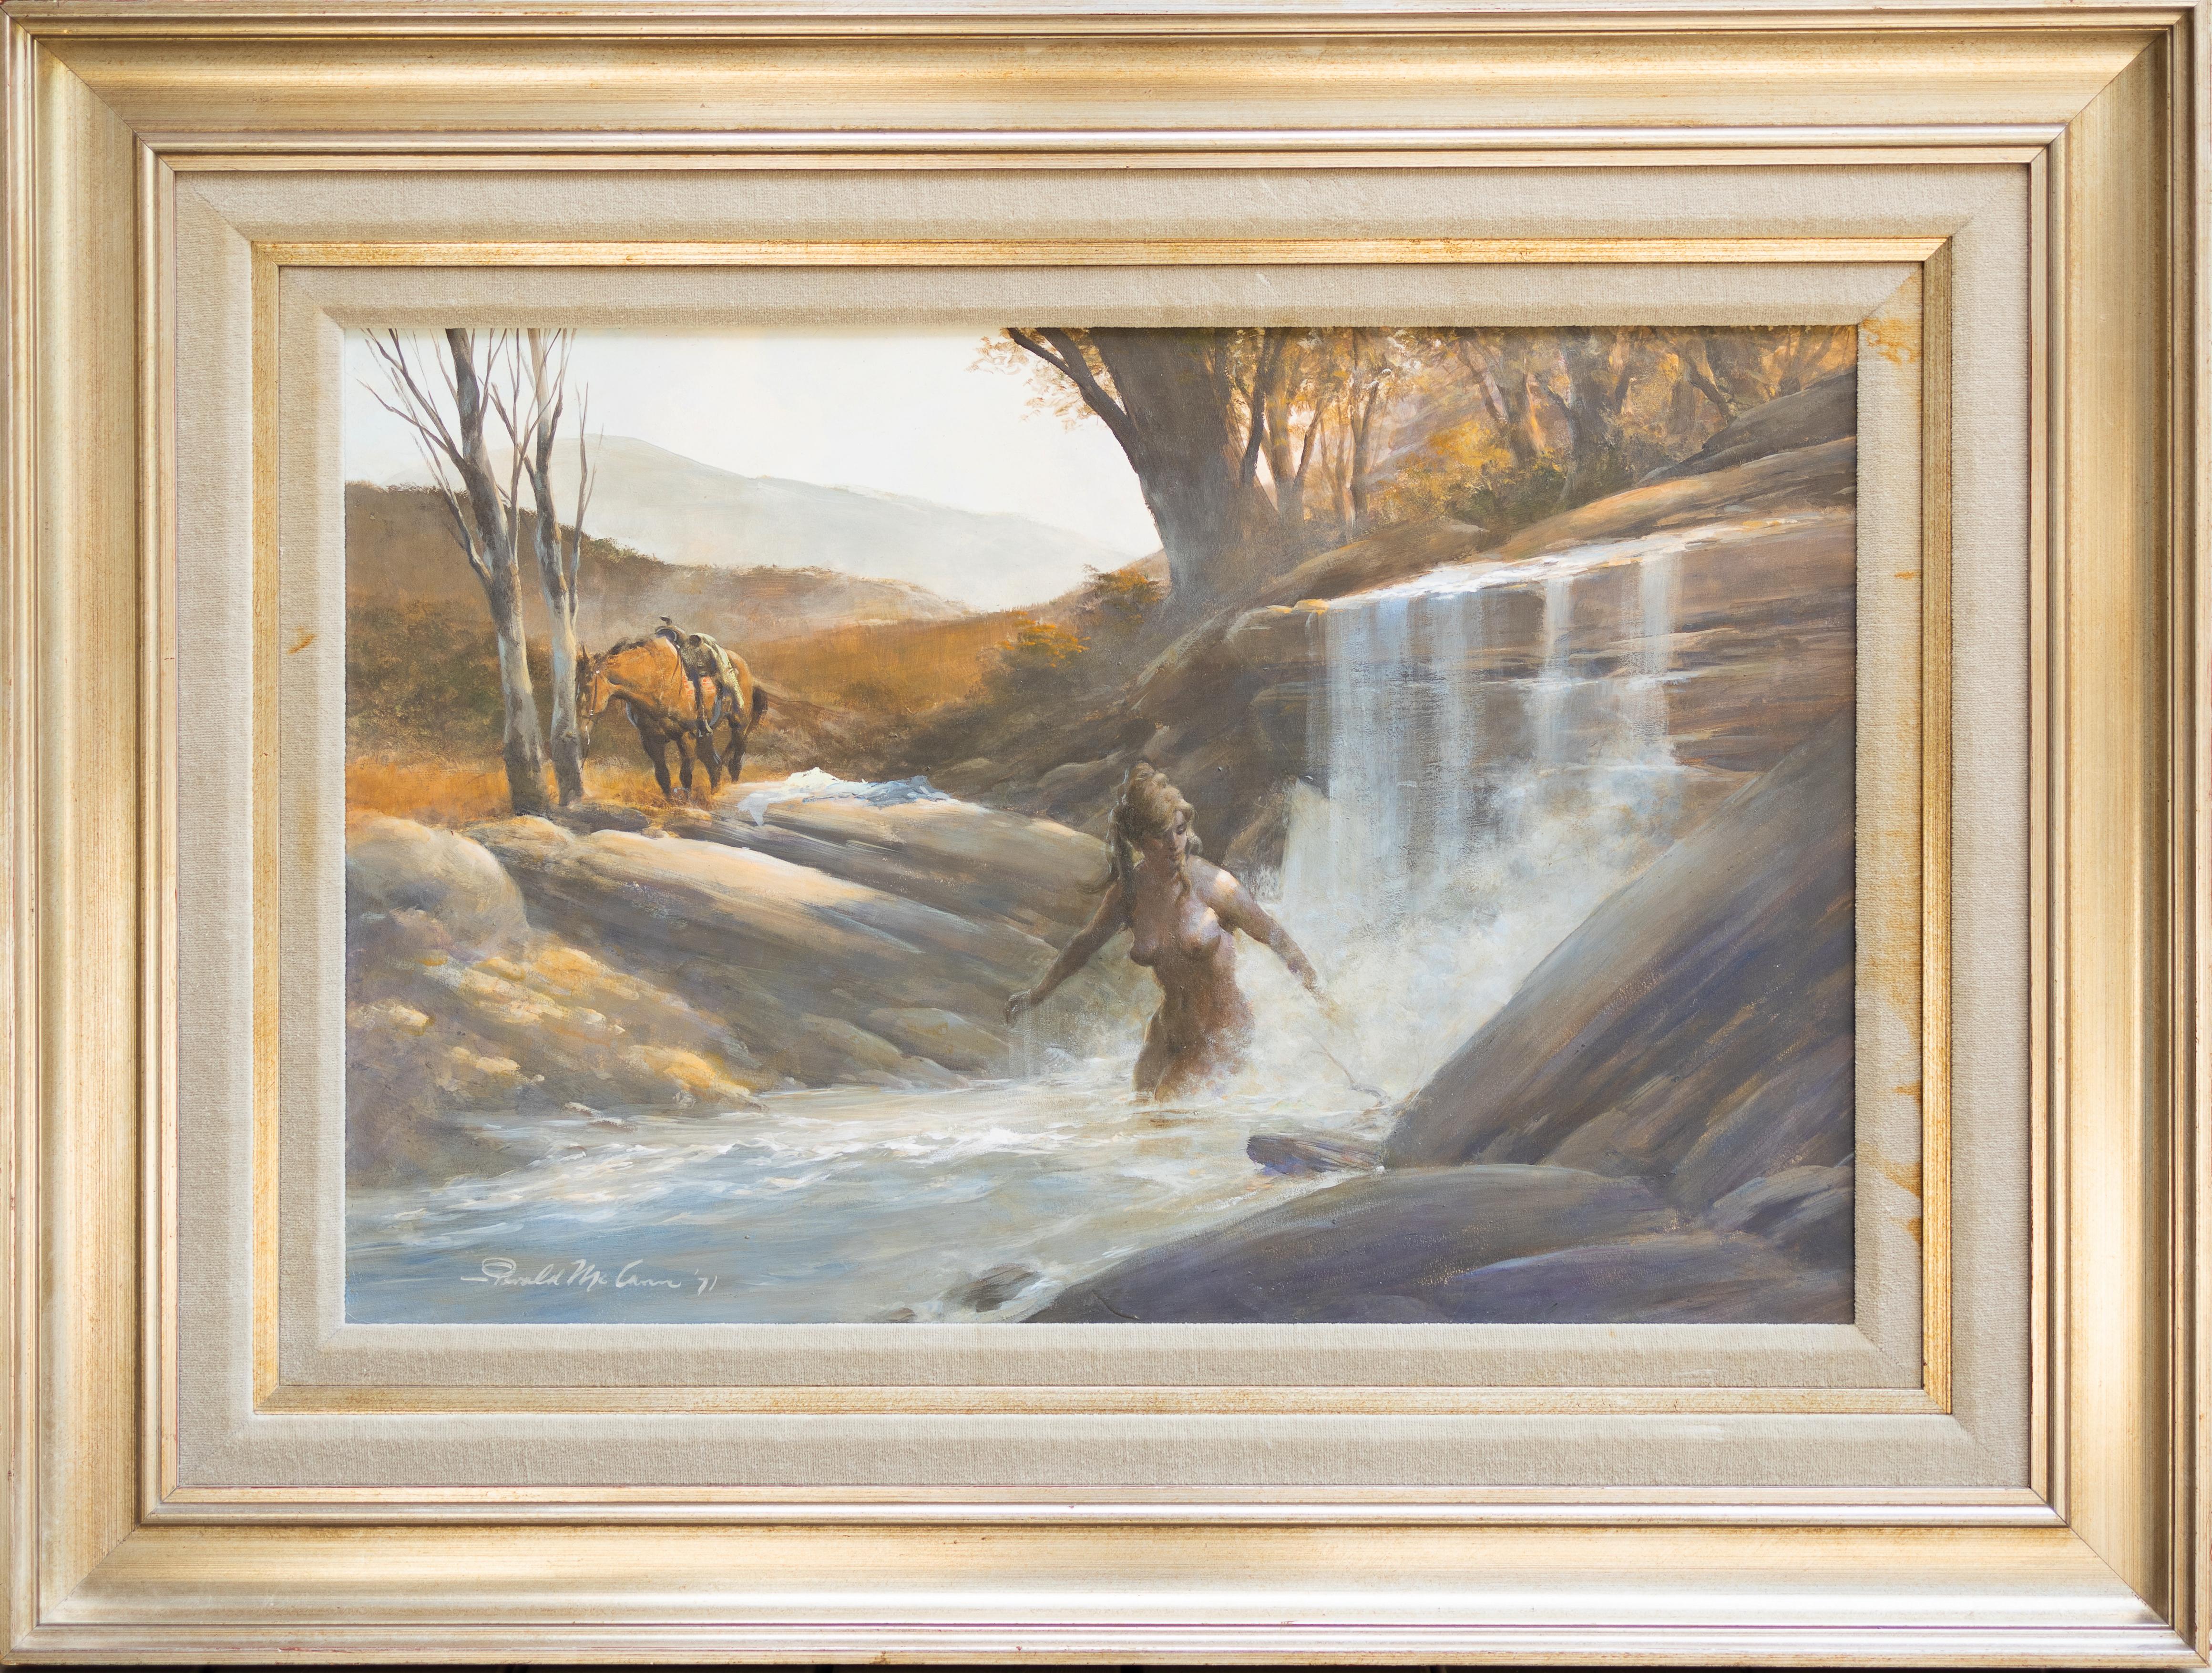 Western Scene with a Woman Bathing in a Creek - Painting by Gerald McCann